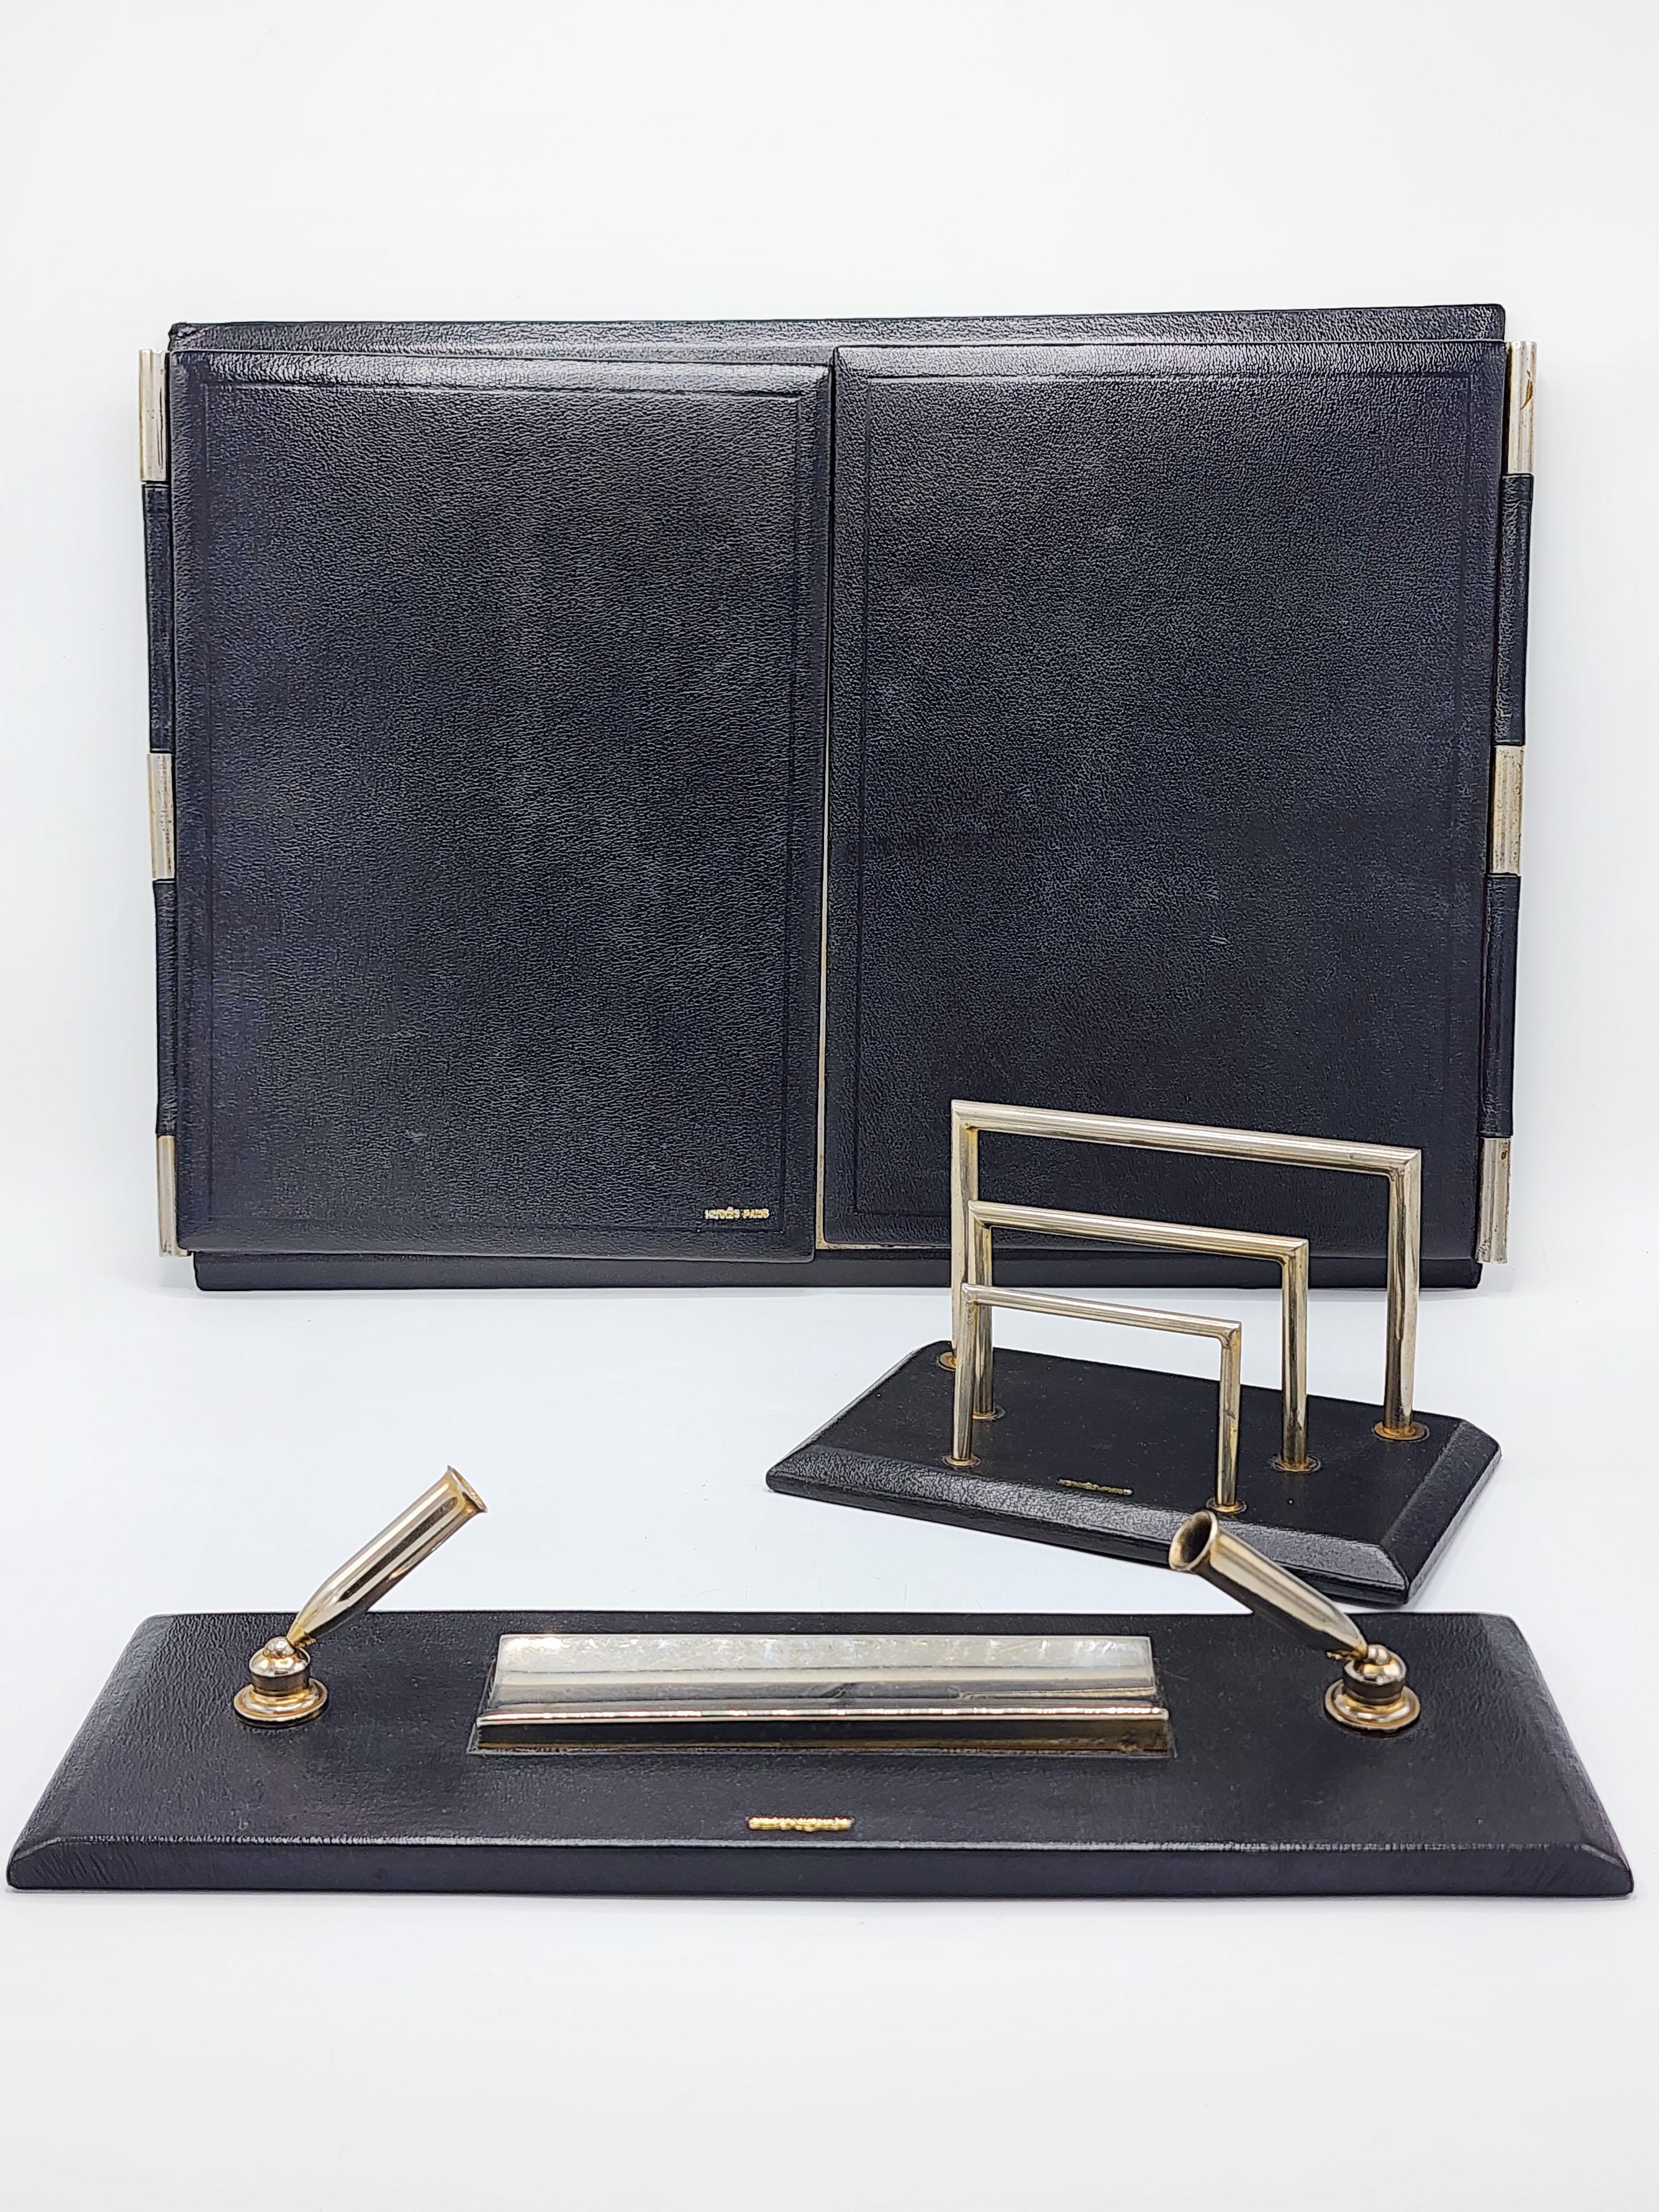 Hermes Paris desk set in black leather and silver metal
Desk set consisting of a stationery holder, a double-flap desk folder and a pen holder with blotter. It is a game that detonates professionalism and elegance. It has wear due to